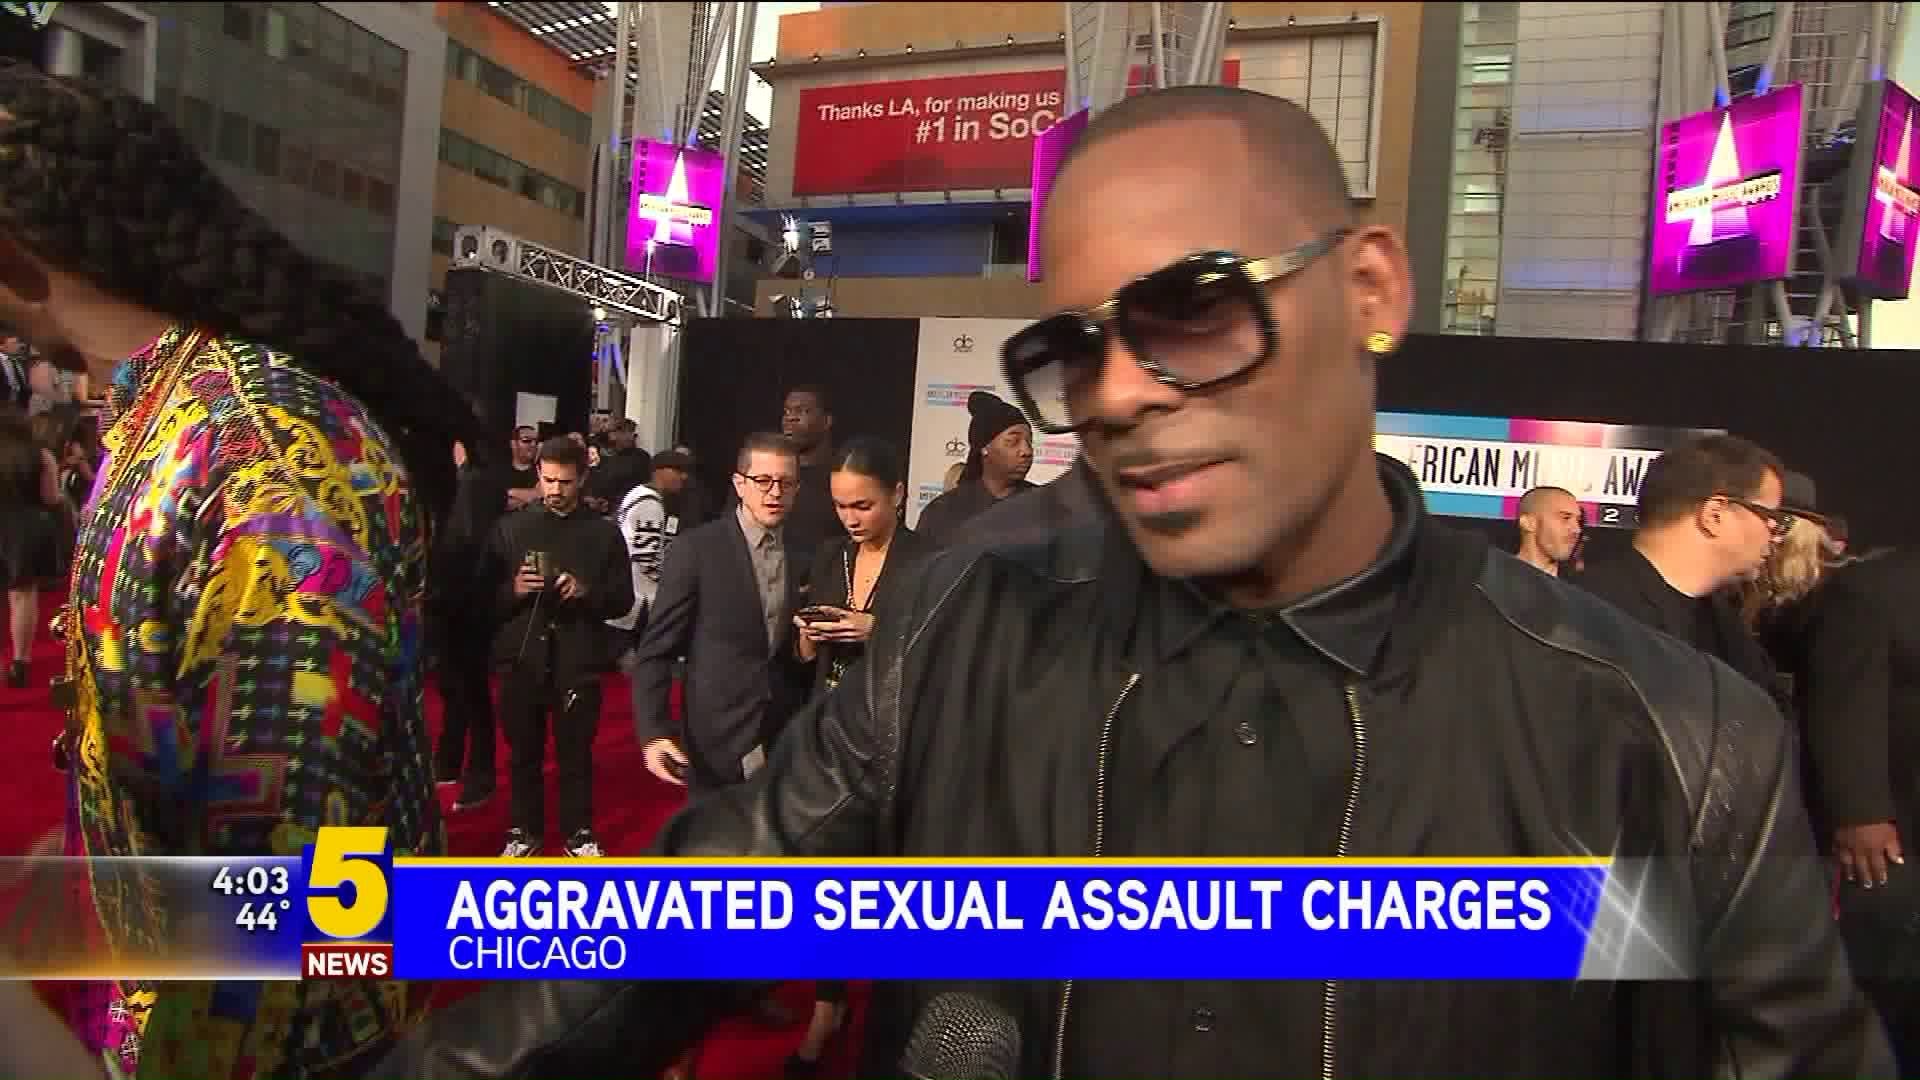 Aggravated Sexual Assault Charges for R. Kelly